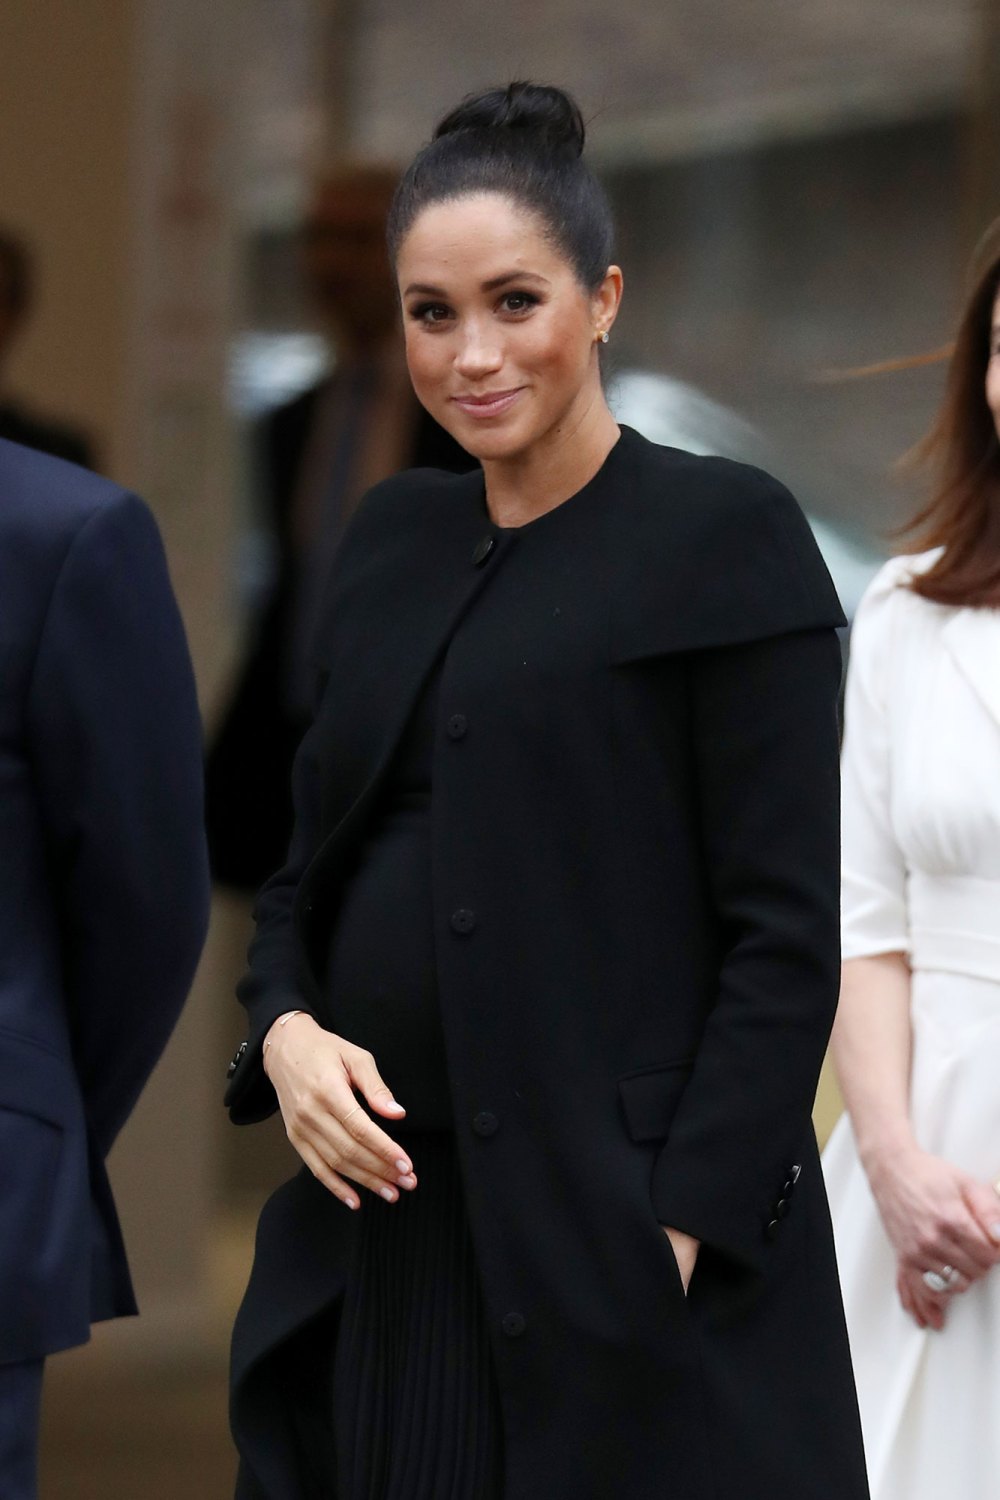 Duchess Meghan Has Been Working With a Doula During Pregnancy